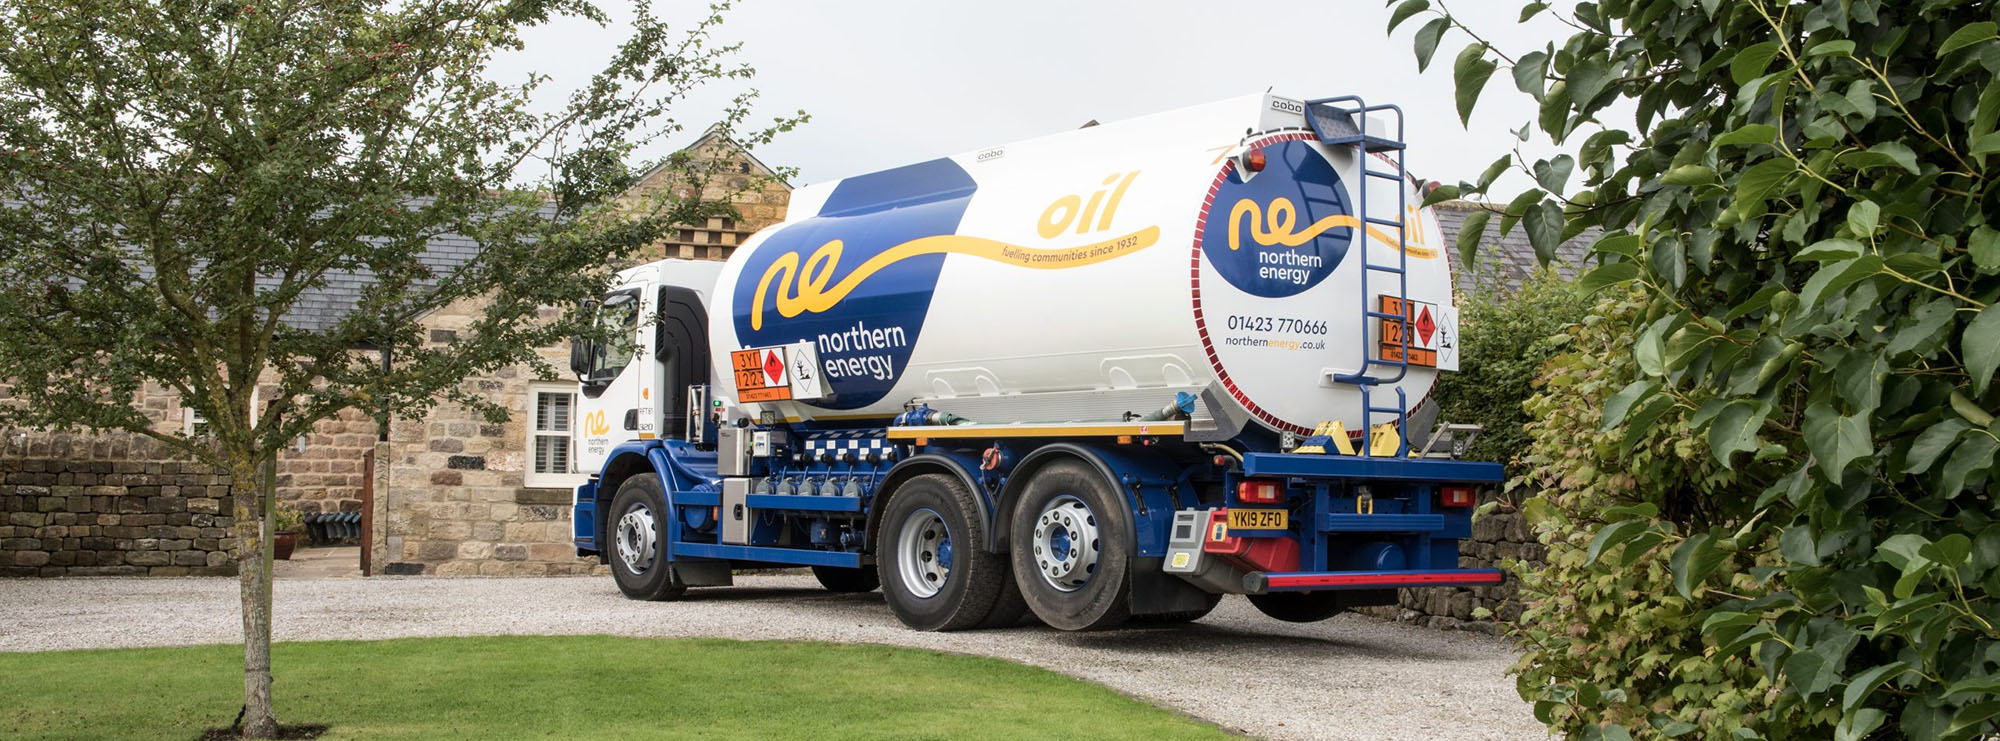 Northern Energy Oil truck pulling up to a house